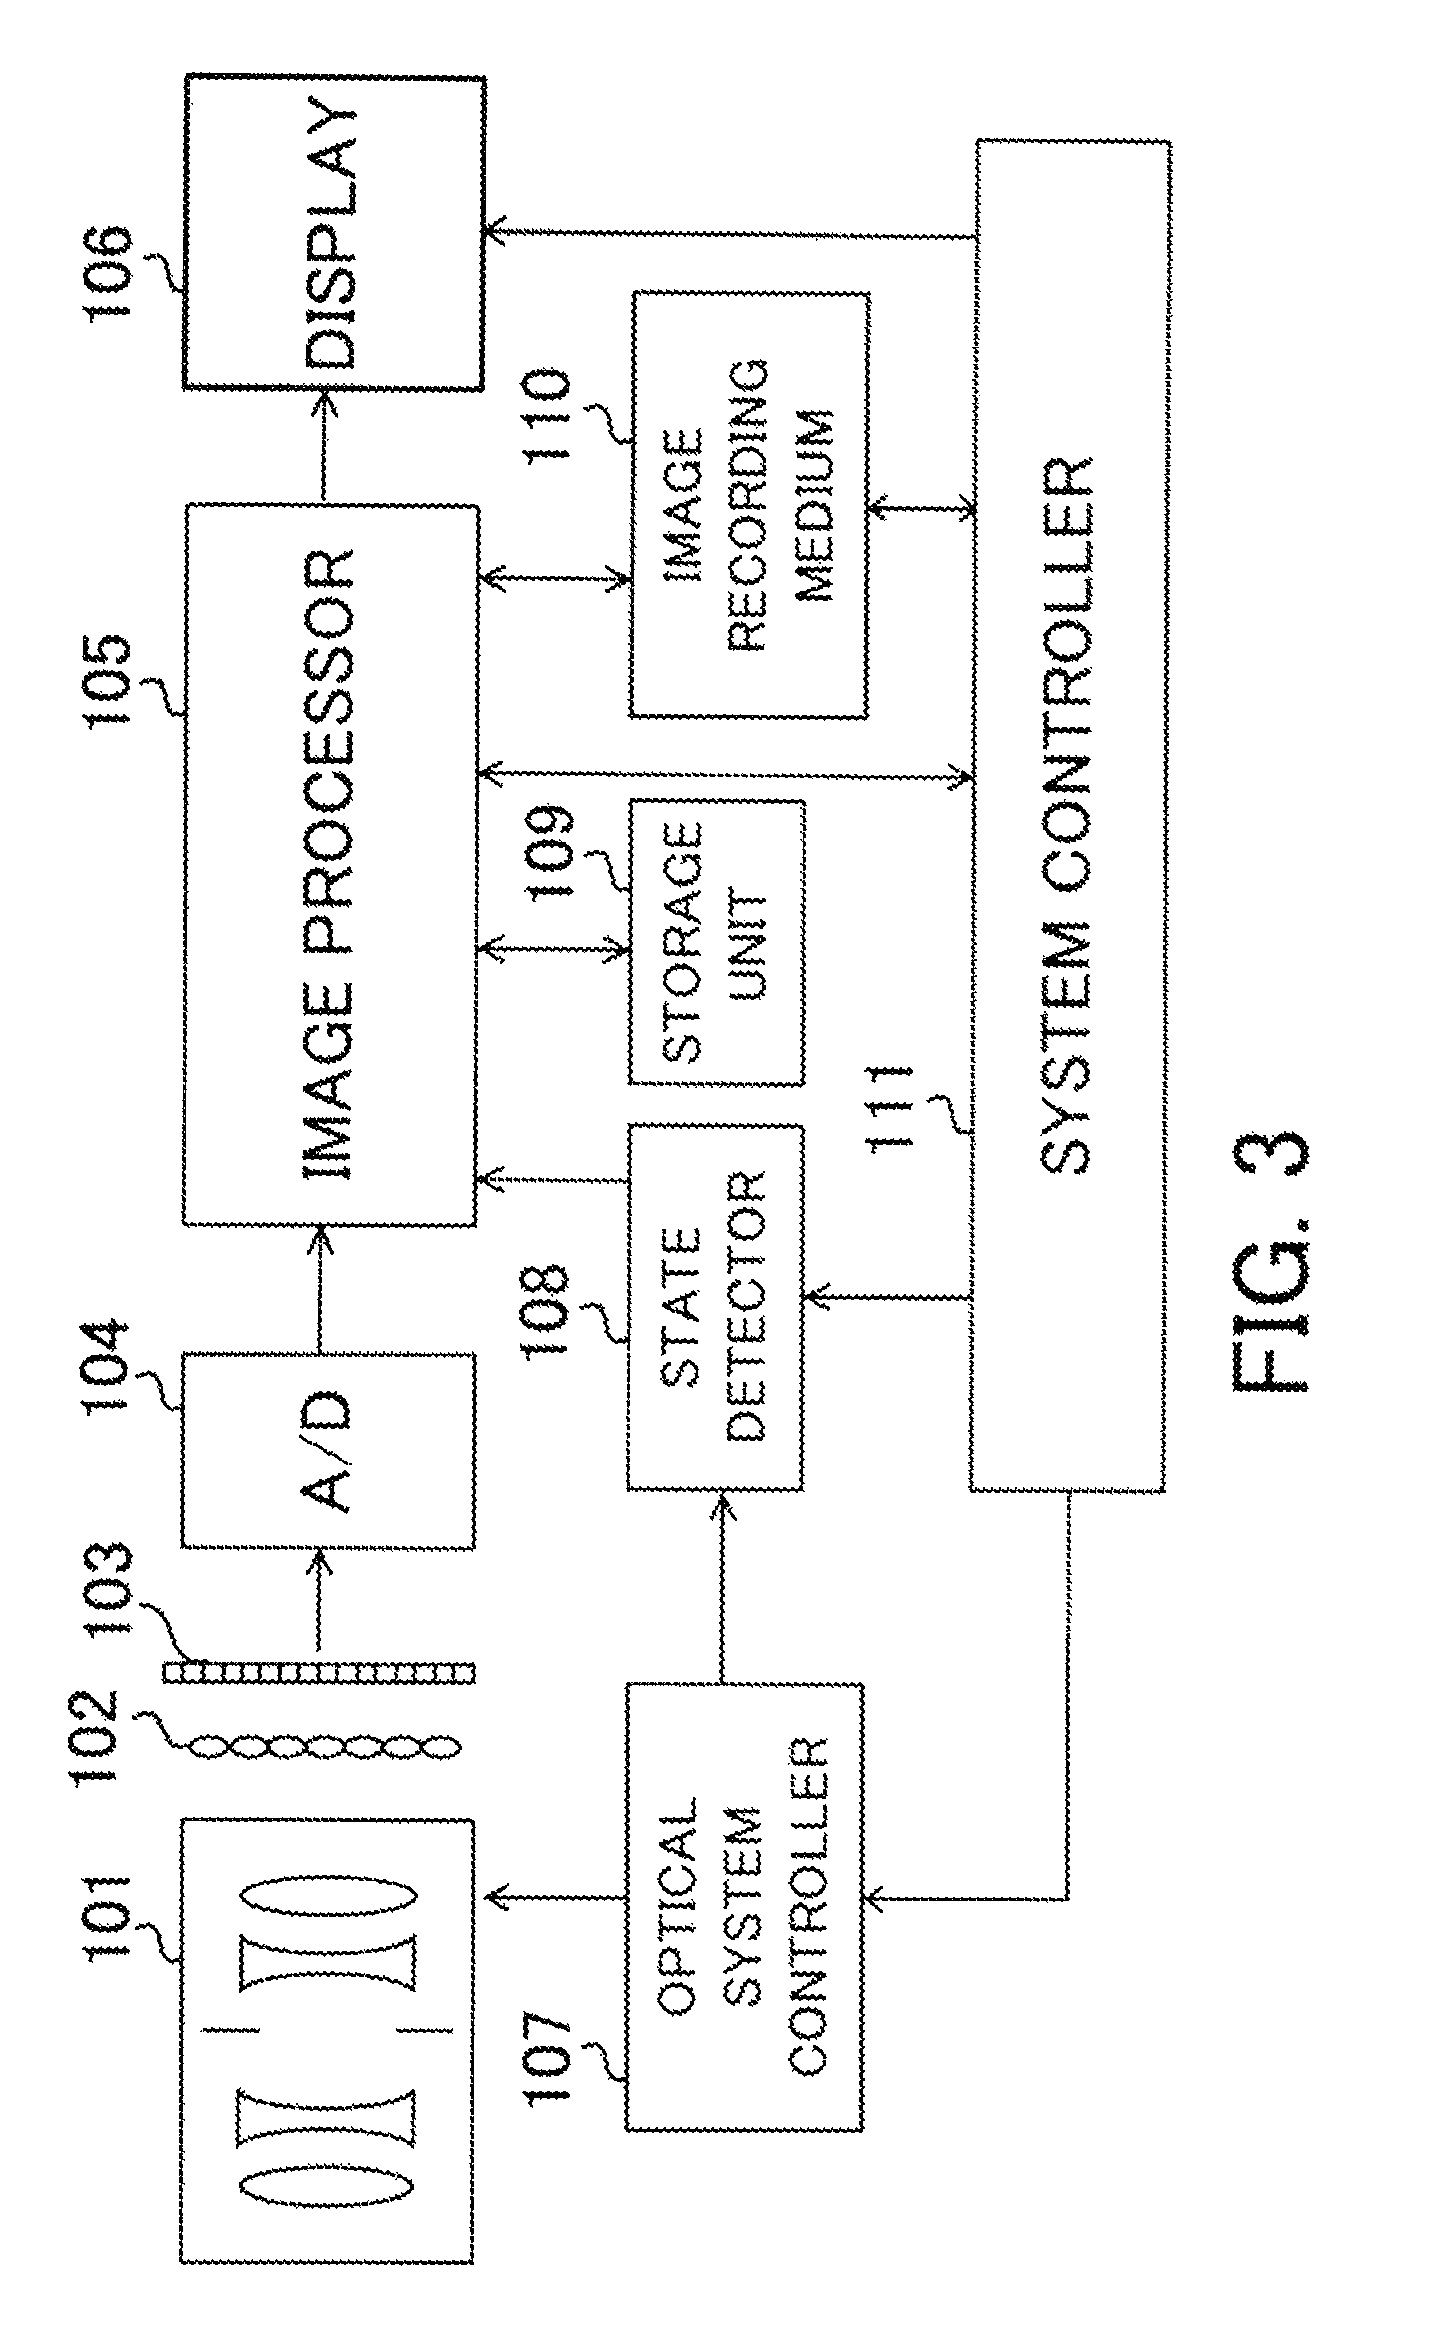 Image pickup apparatus having lens array and image pickup optical system